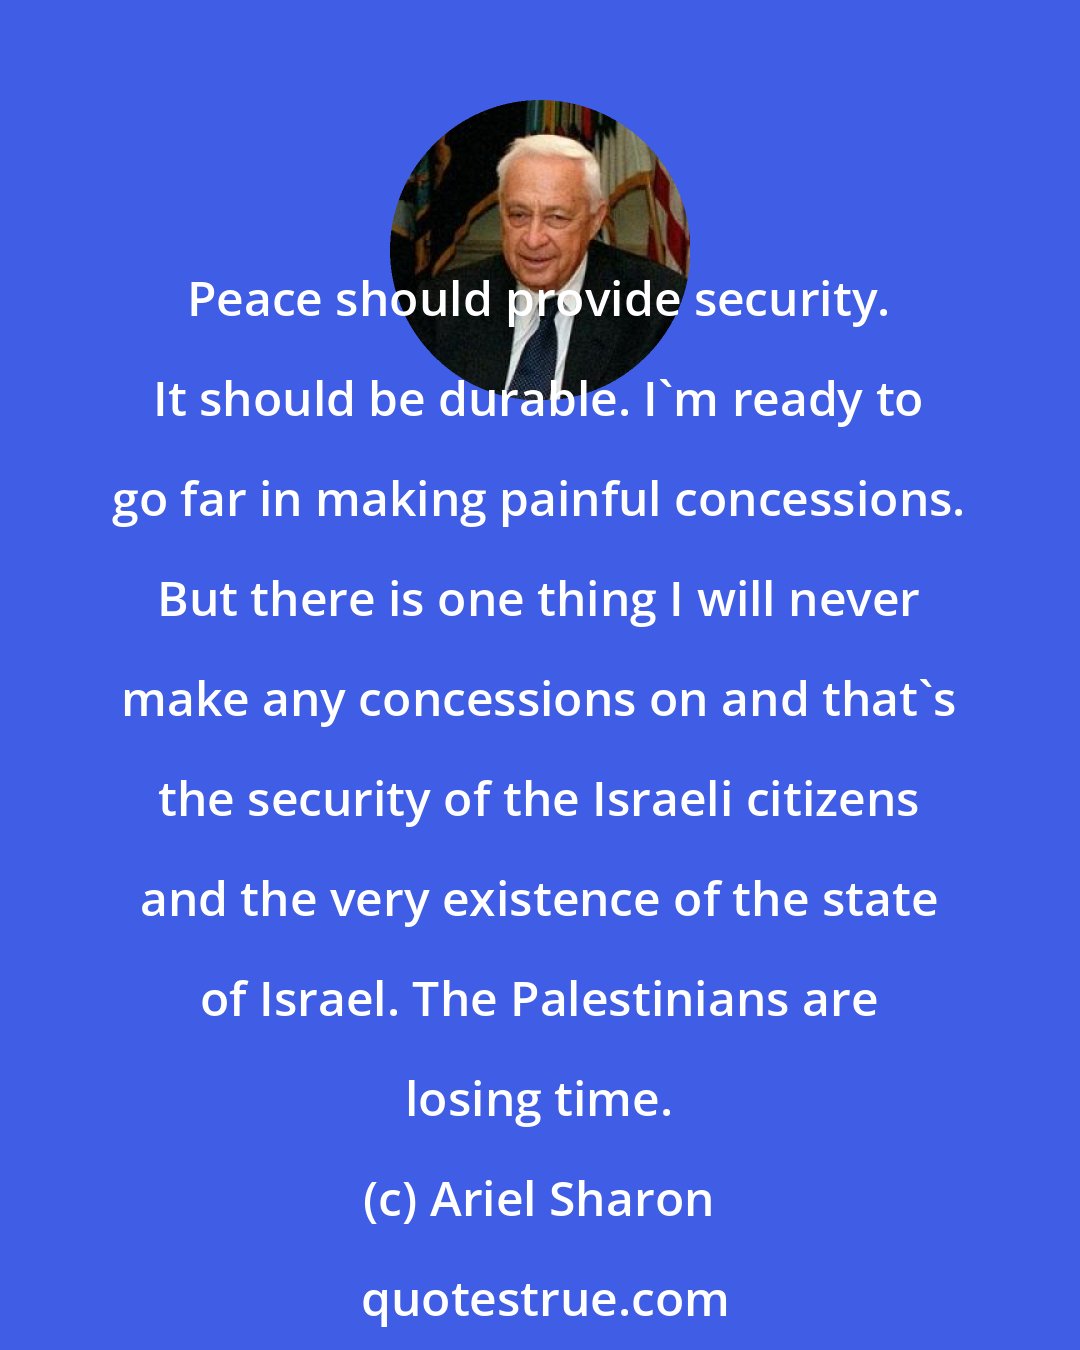 Ariel Sharon: Peace should provide security. It should be durable. I'm ready to go far in making painful concessions. But there is one thing I will never make any concessions on and that's the security of the Israeli citizens and the very existence of the state of Israel. The Palestinians are losing time.